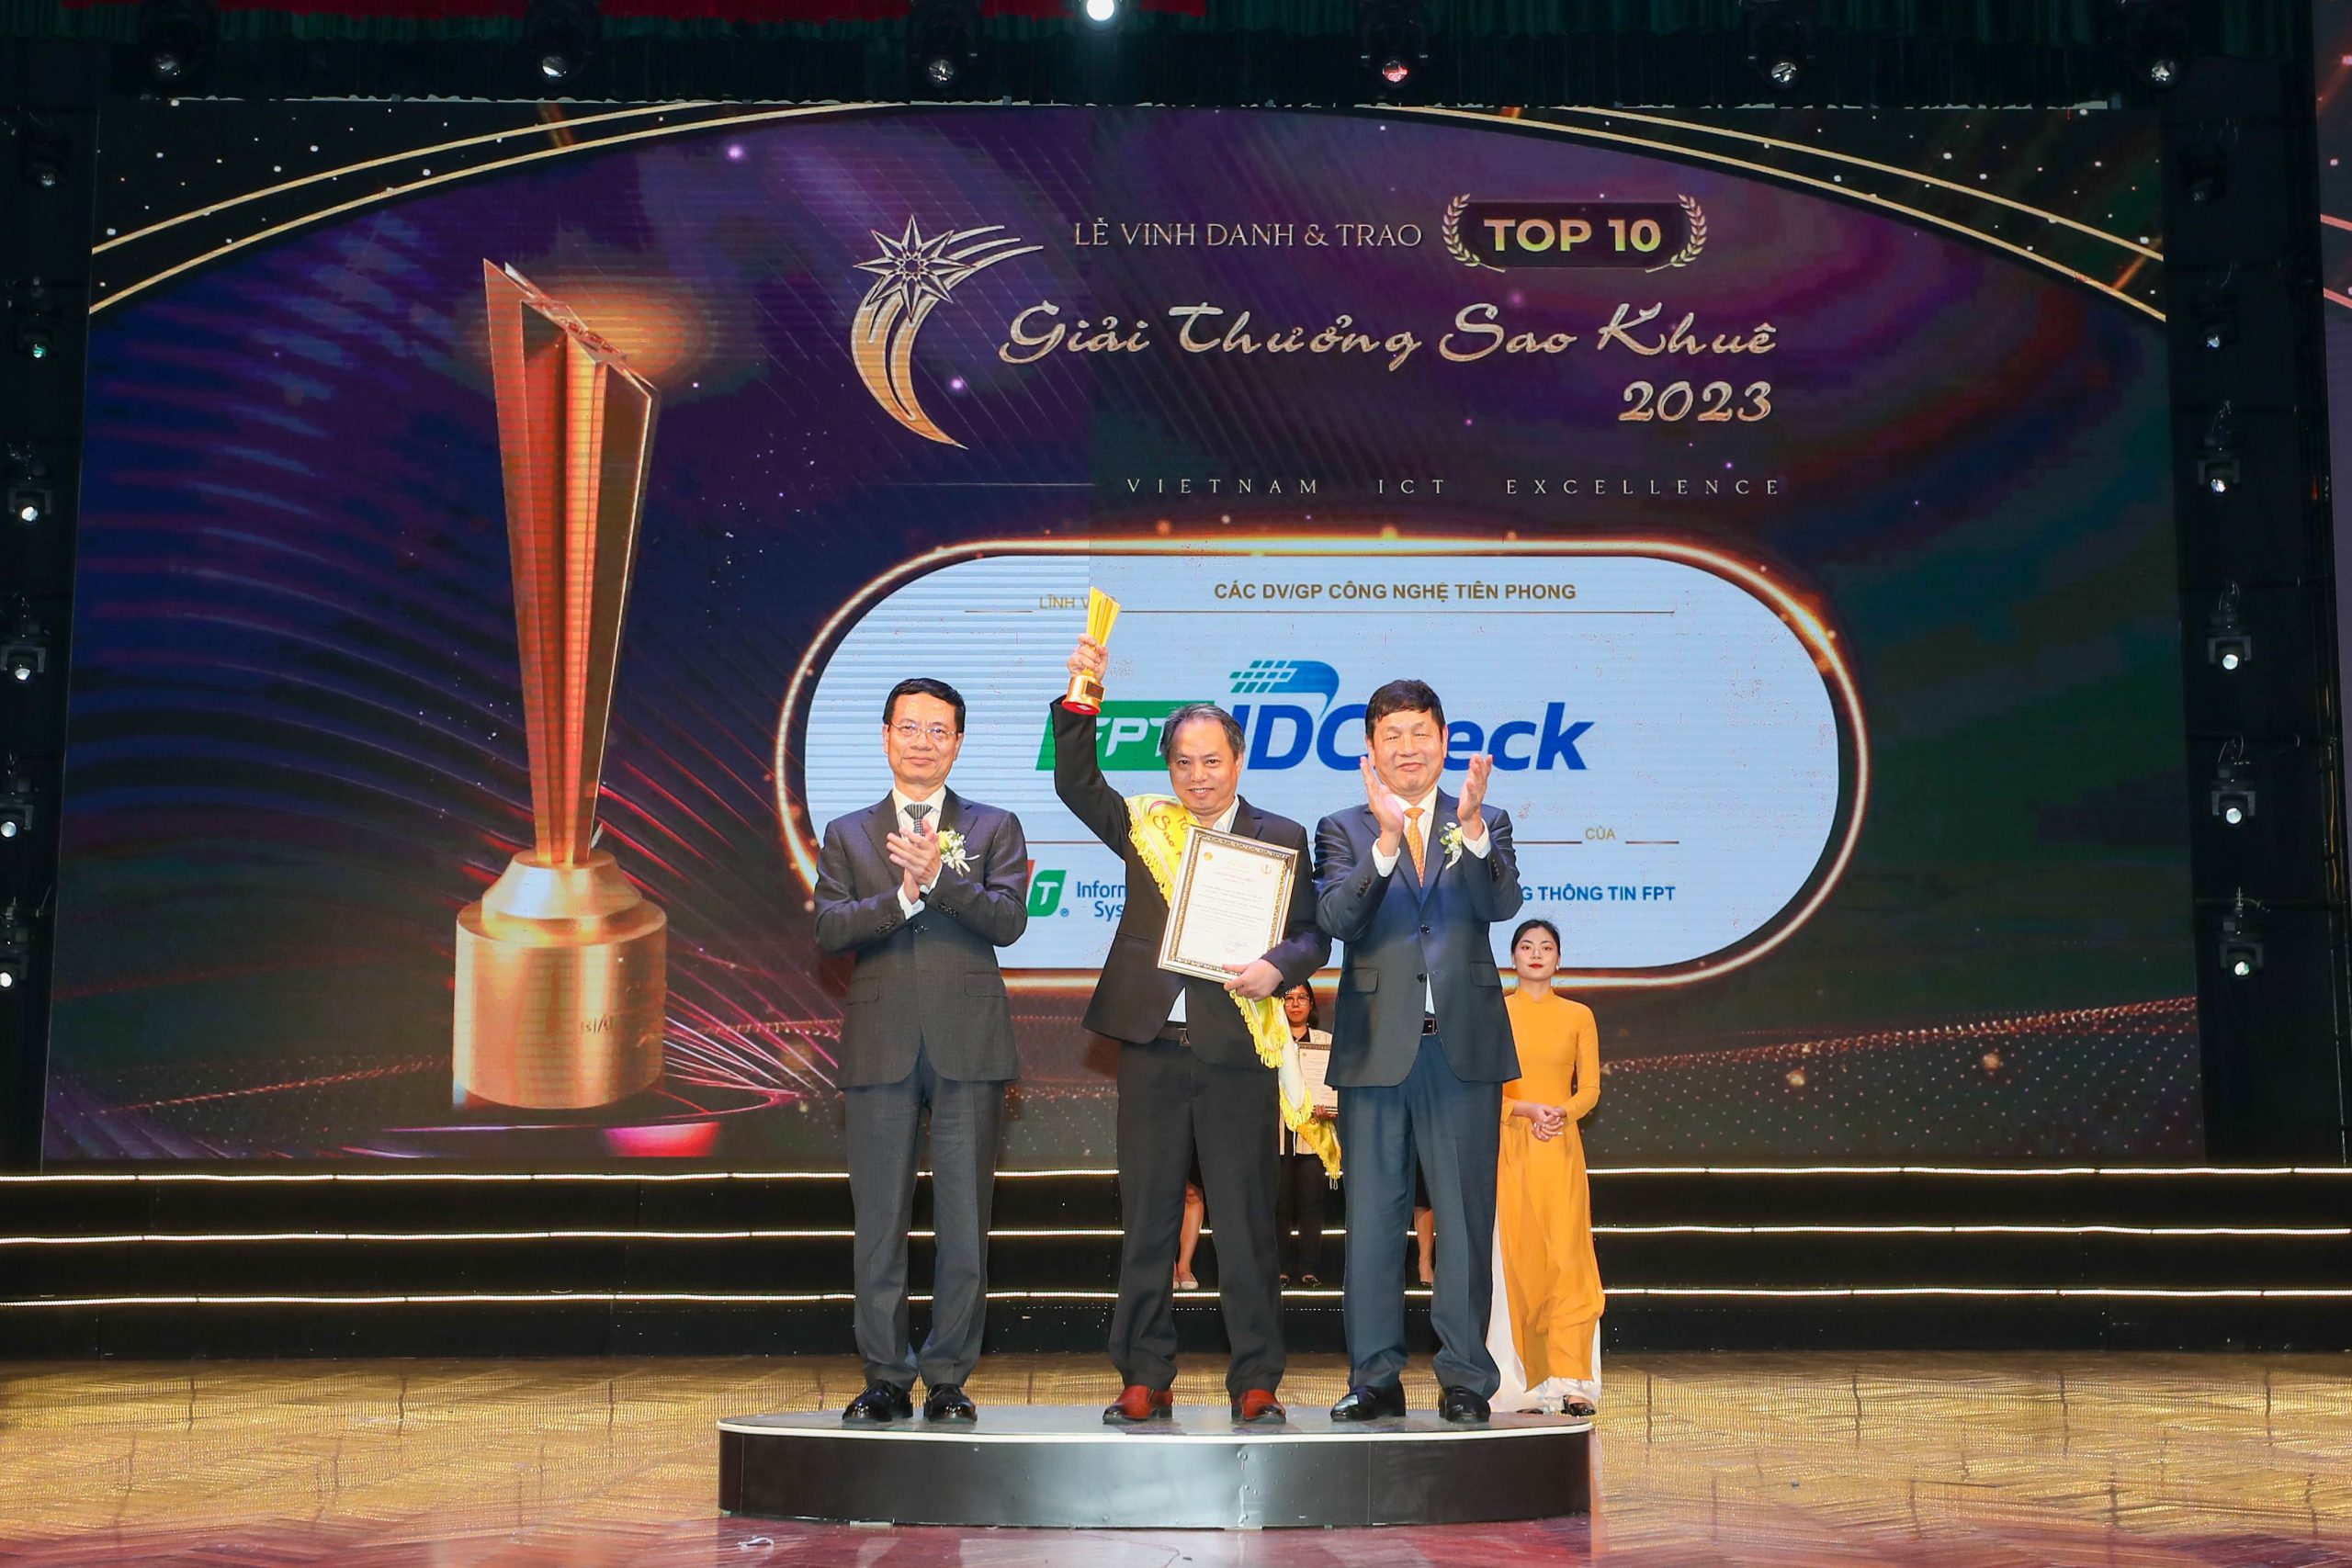 2023 Sao Khue Awards (Vietnam ICT Excellence) – Top 10 Sao Khue 2023 – Anti-fraud Solution for Digital Identity Verification (FPT.IDCheck)